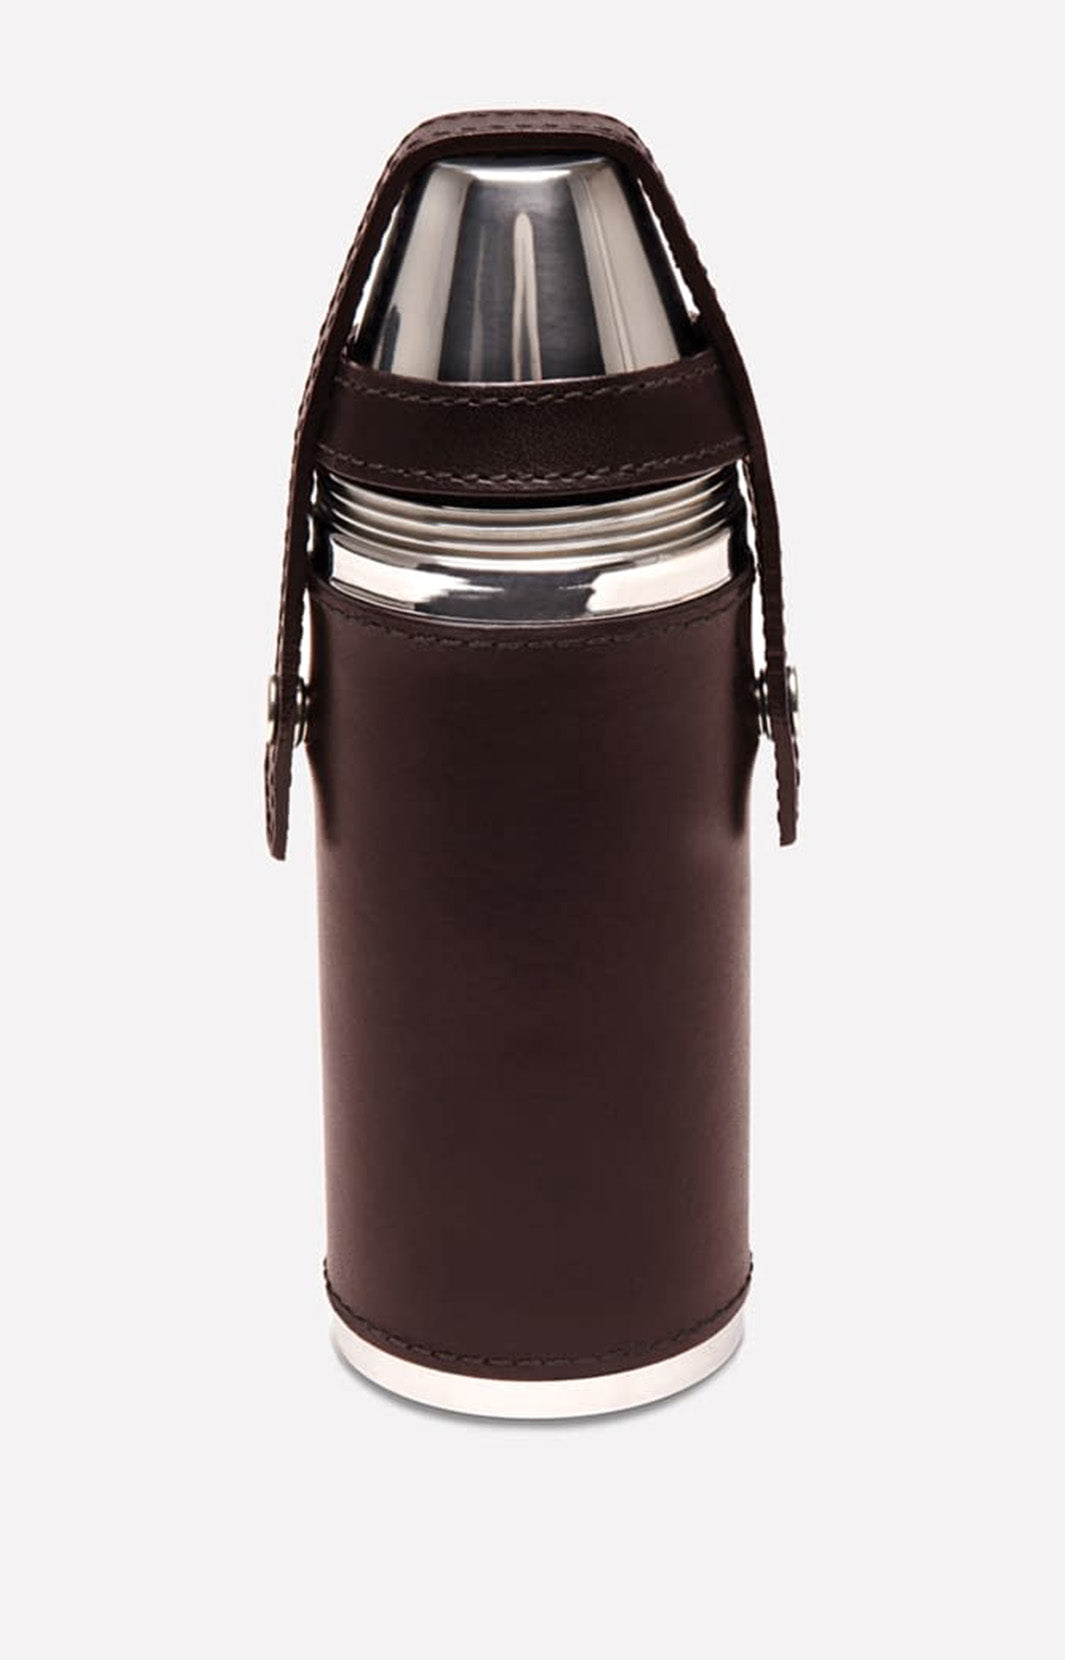 NATURAL WOOD AND STAINLESS STEEL FOOD FLASK – The Huntington Store